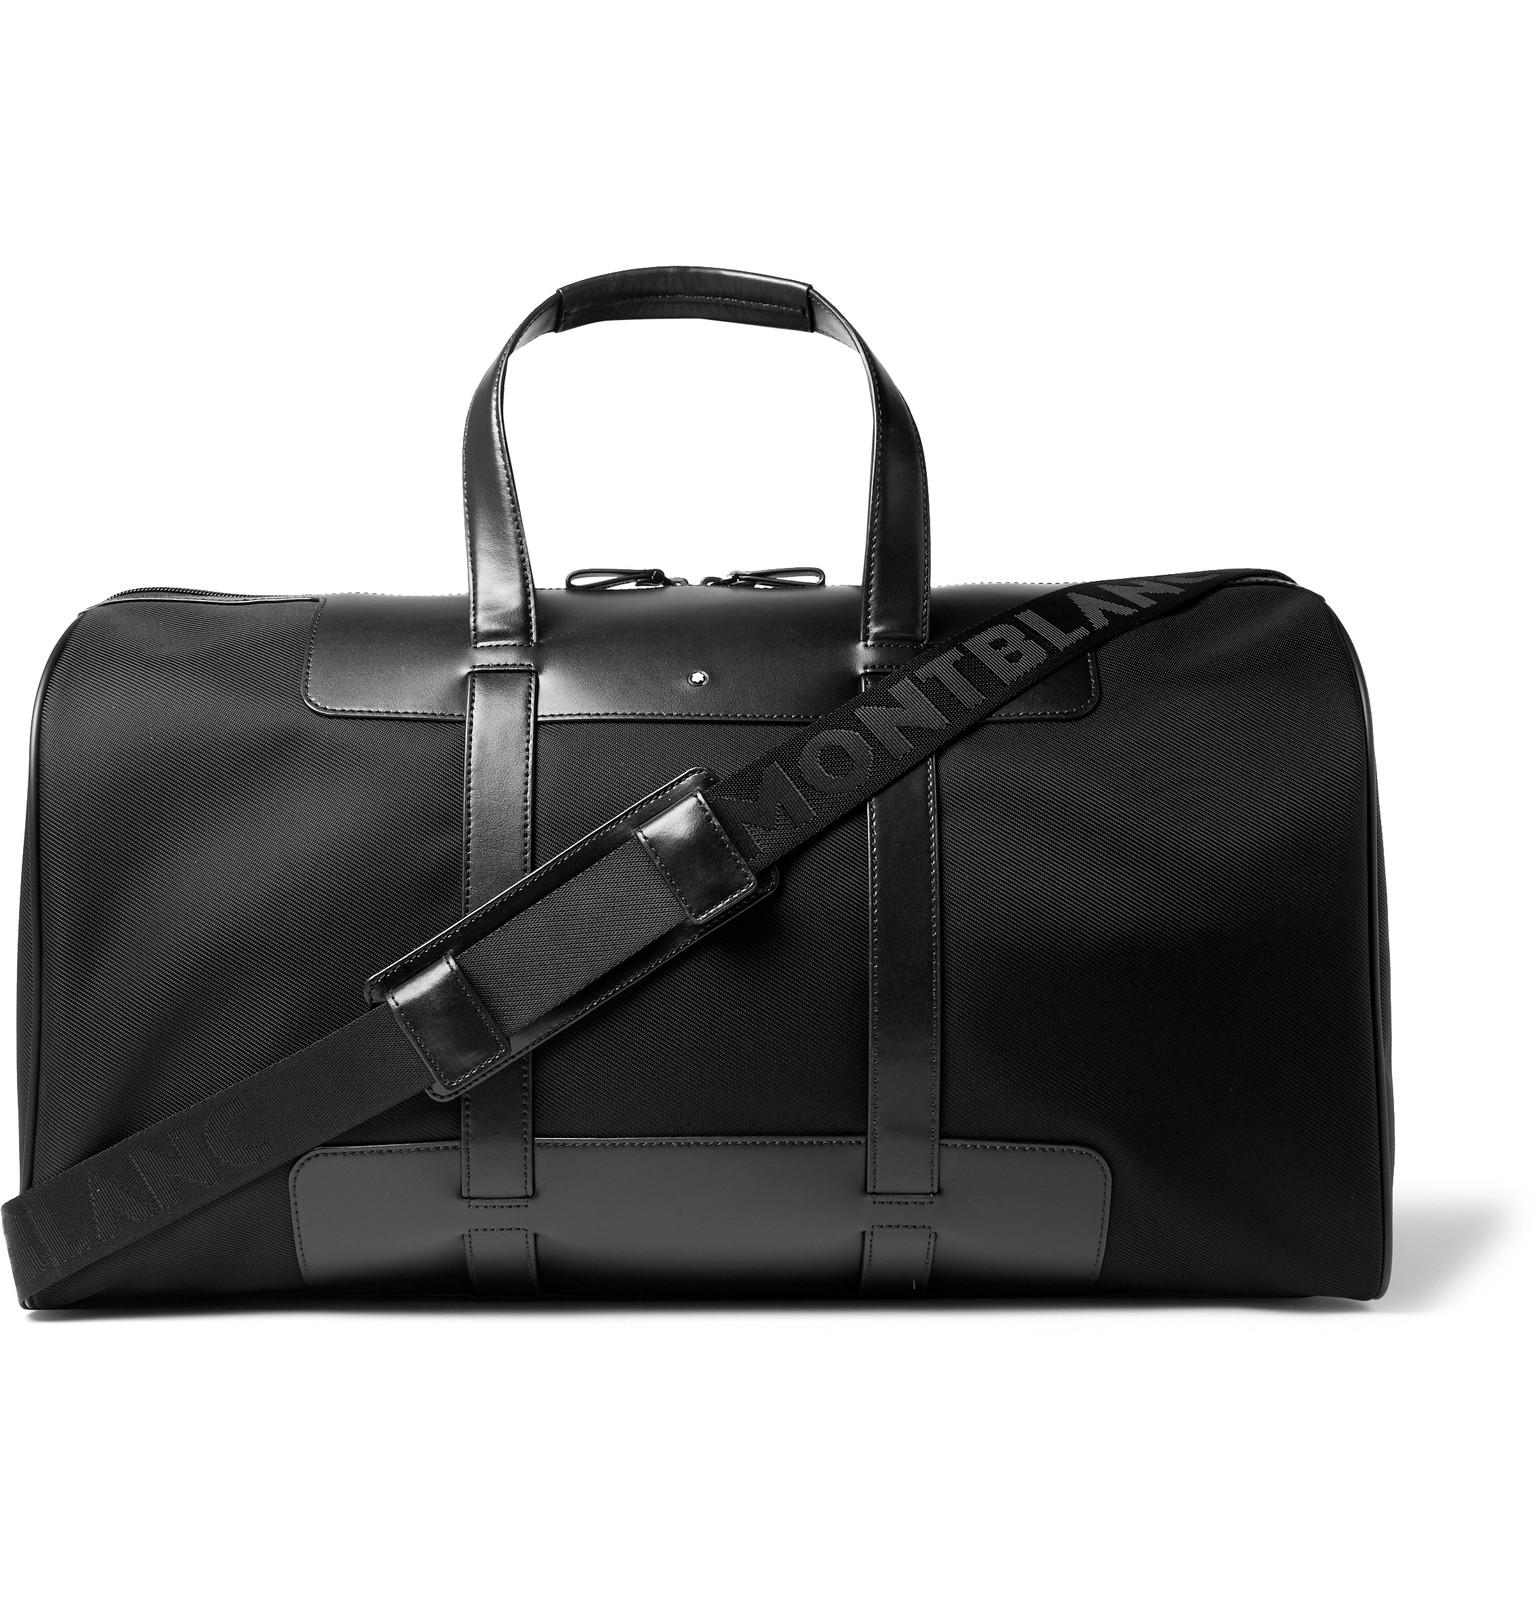 Lyst - Montblanc Panelled Leather And Canvas Duffle Bag in Black for Men